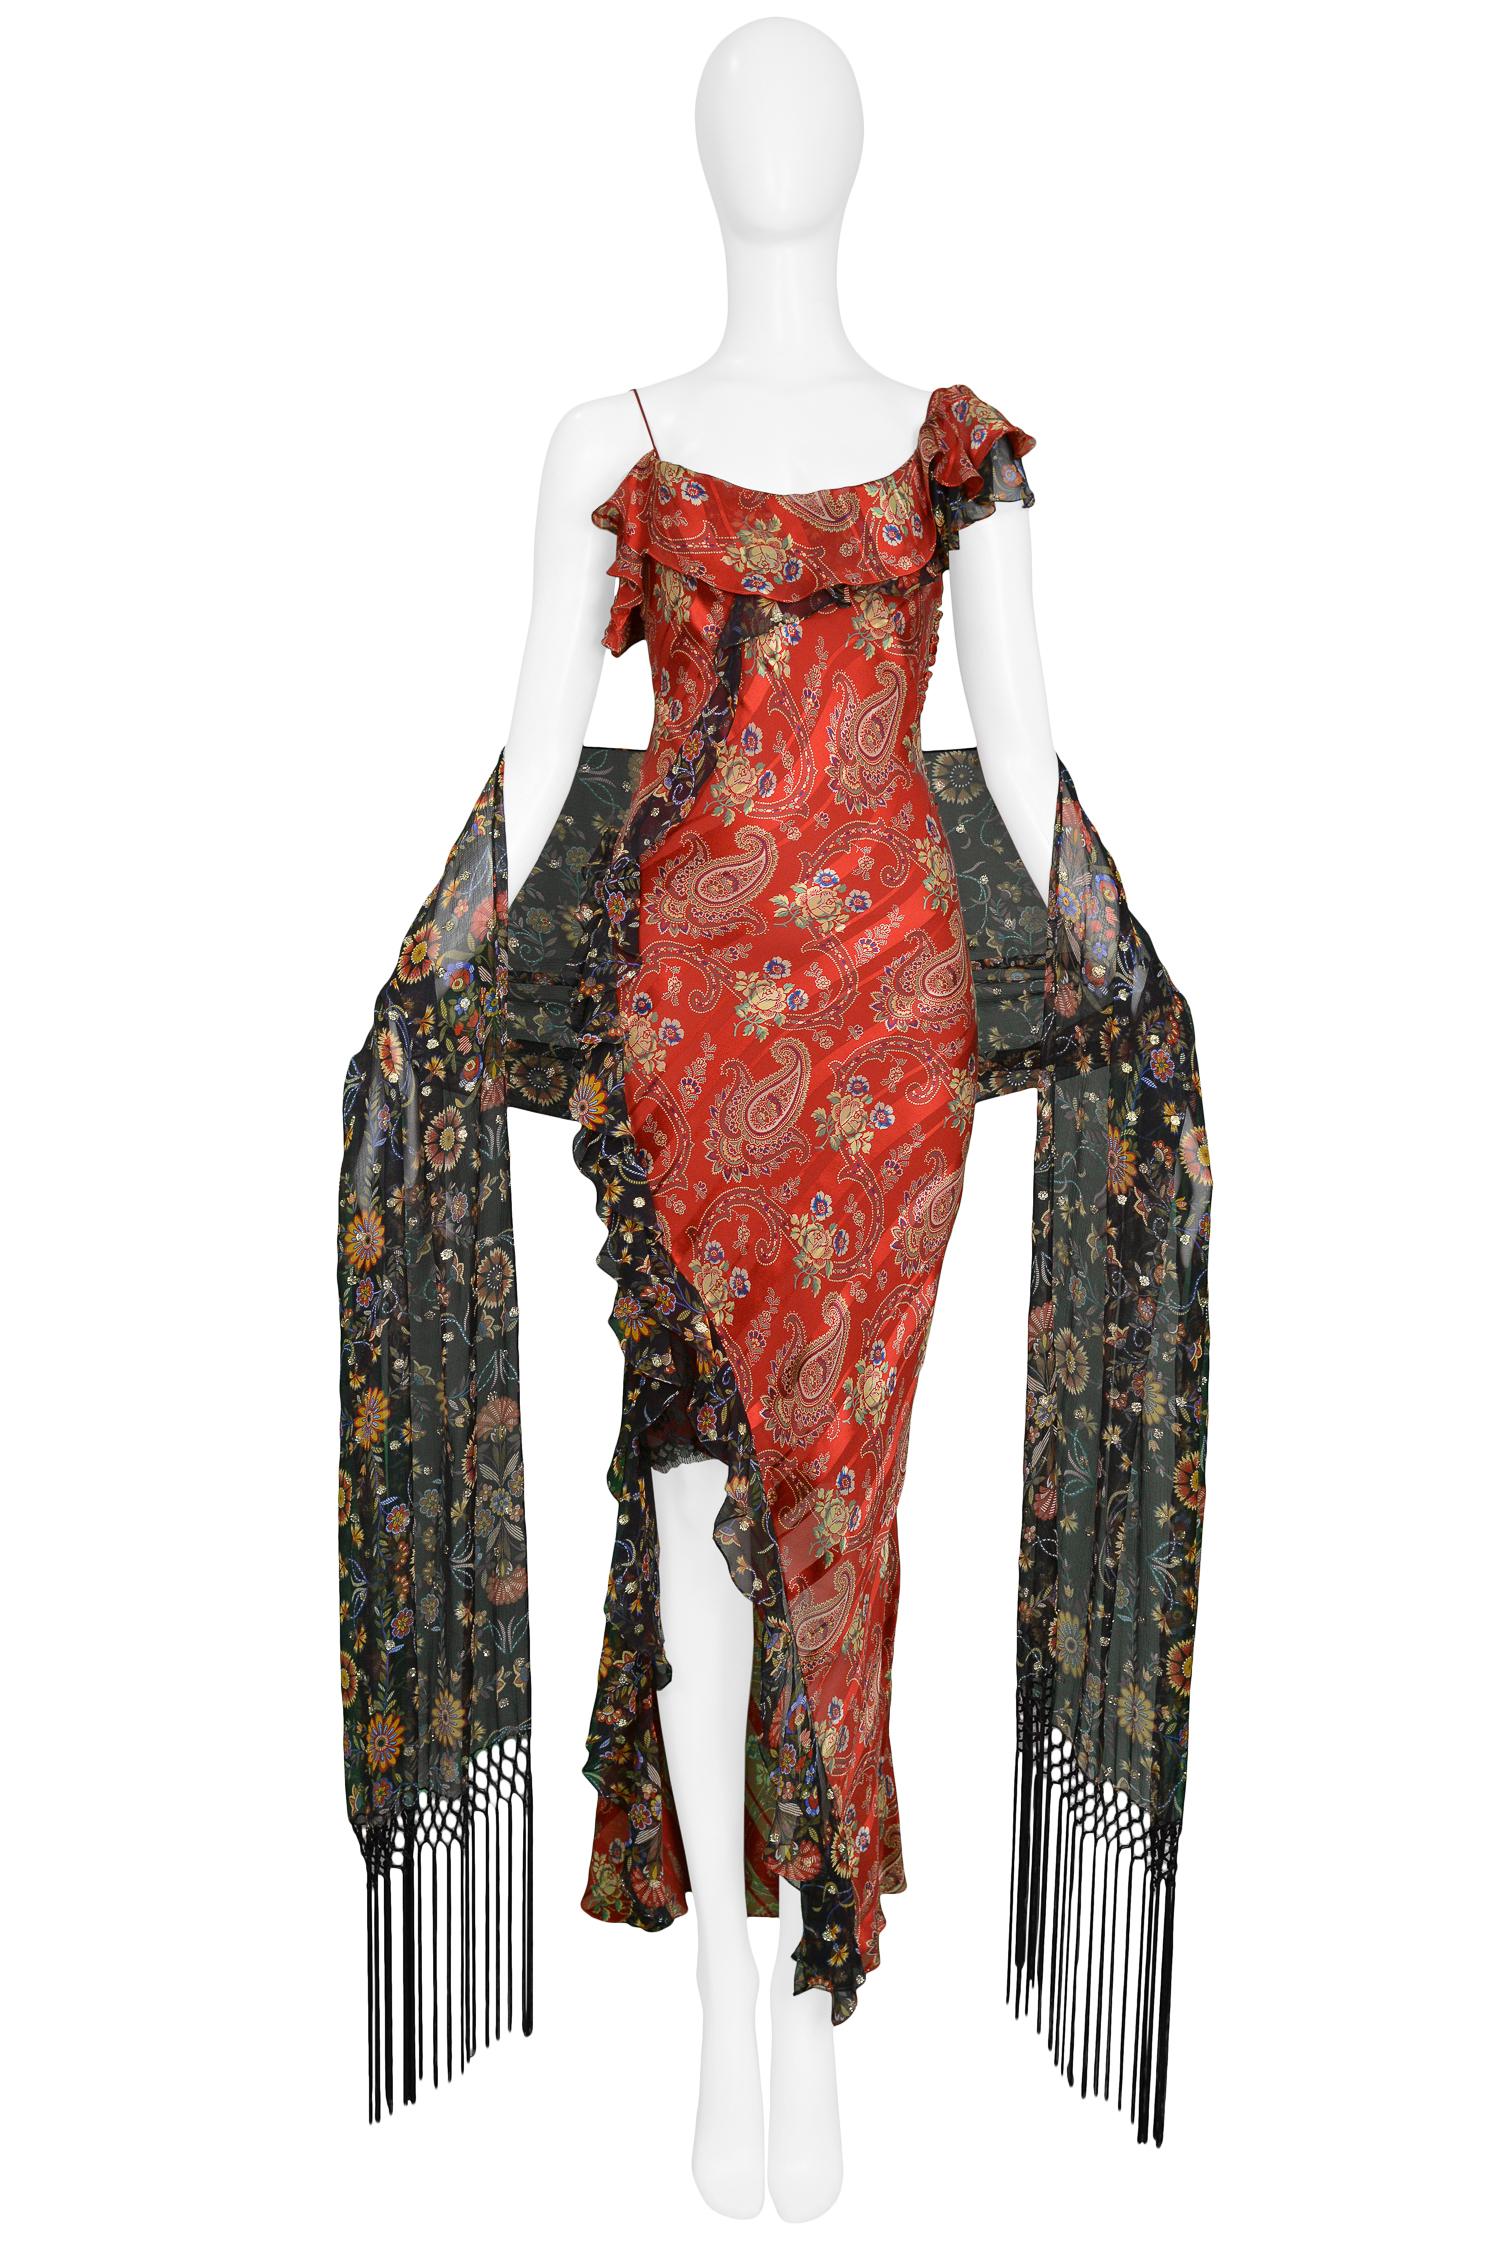 Vintage Dior by John Galliano asymmetrical red paisley silk bias cut dress with black printed chiffon trim and slit detail. The dress features a matching printed & fringe shawl.

Excellent Condition.

Size: 38